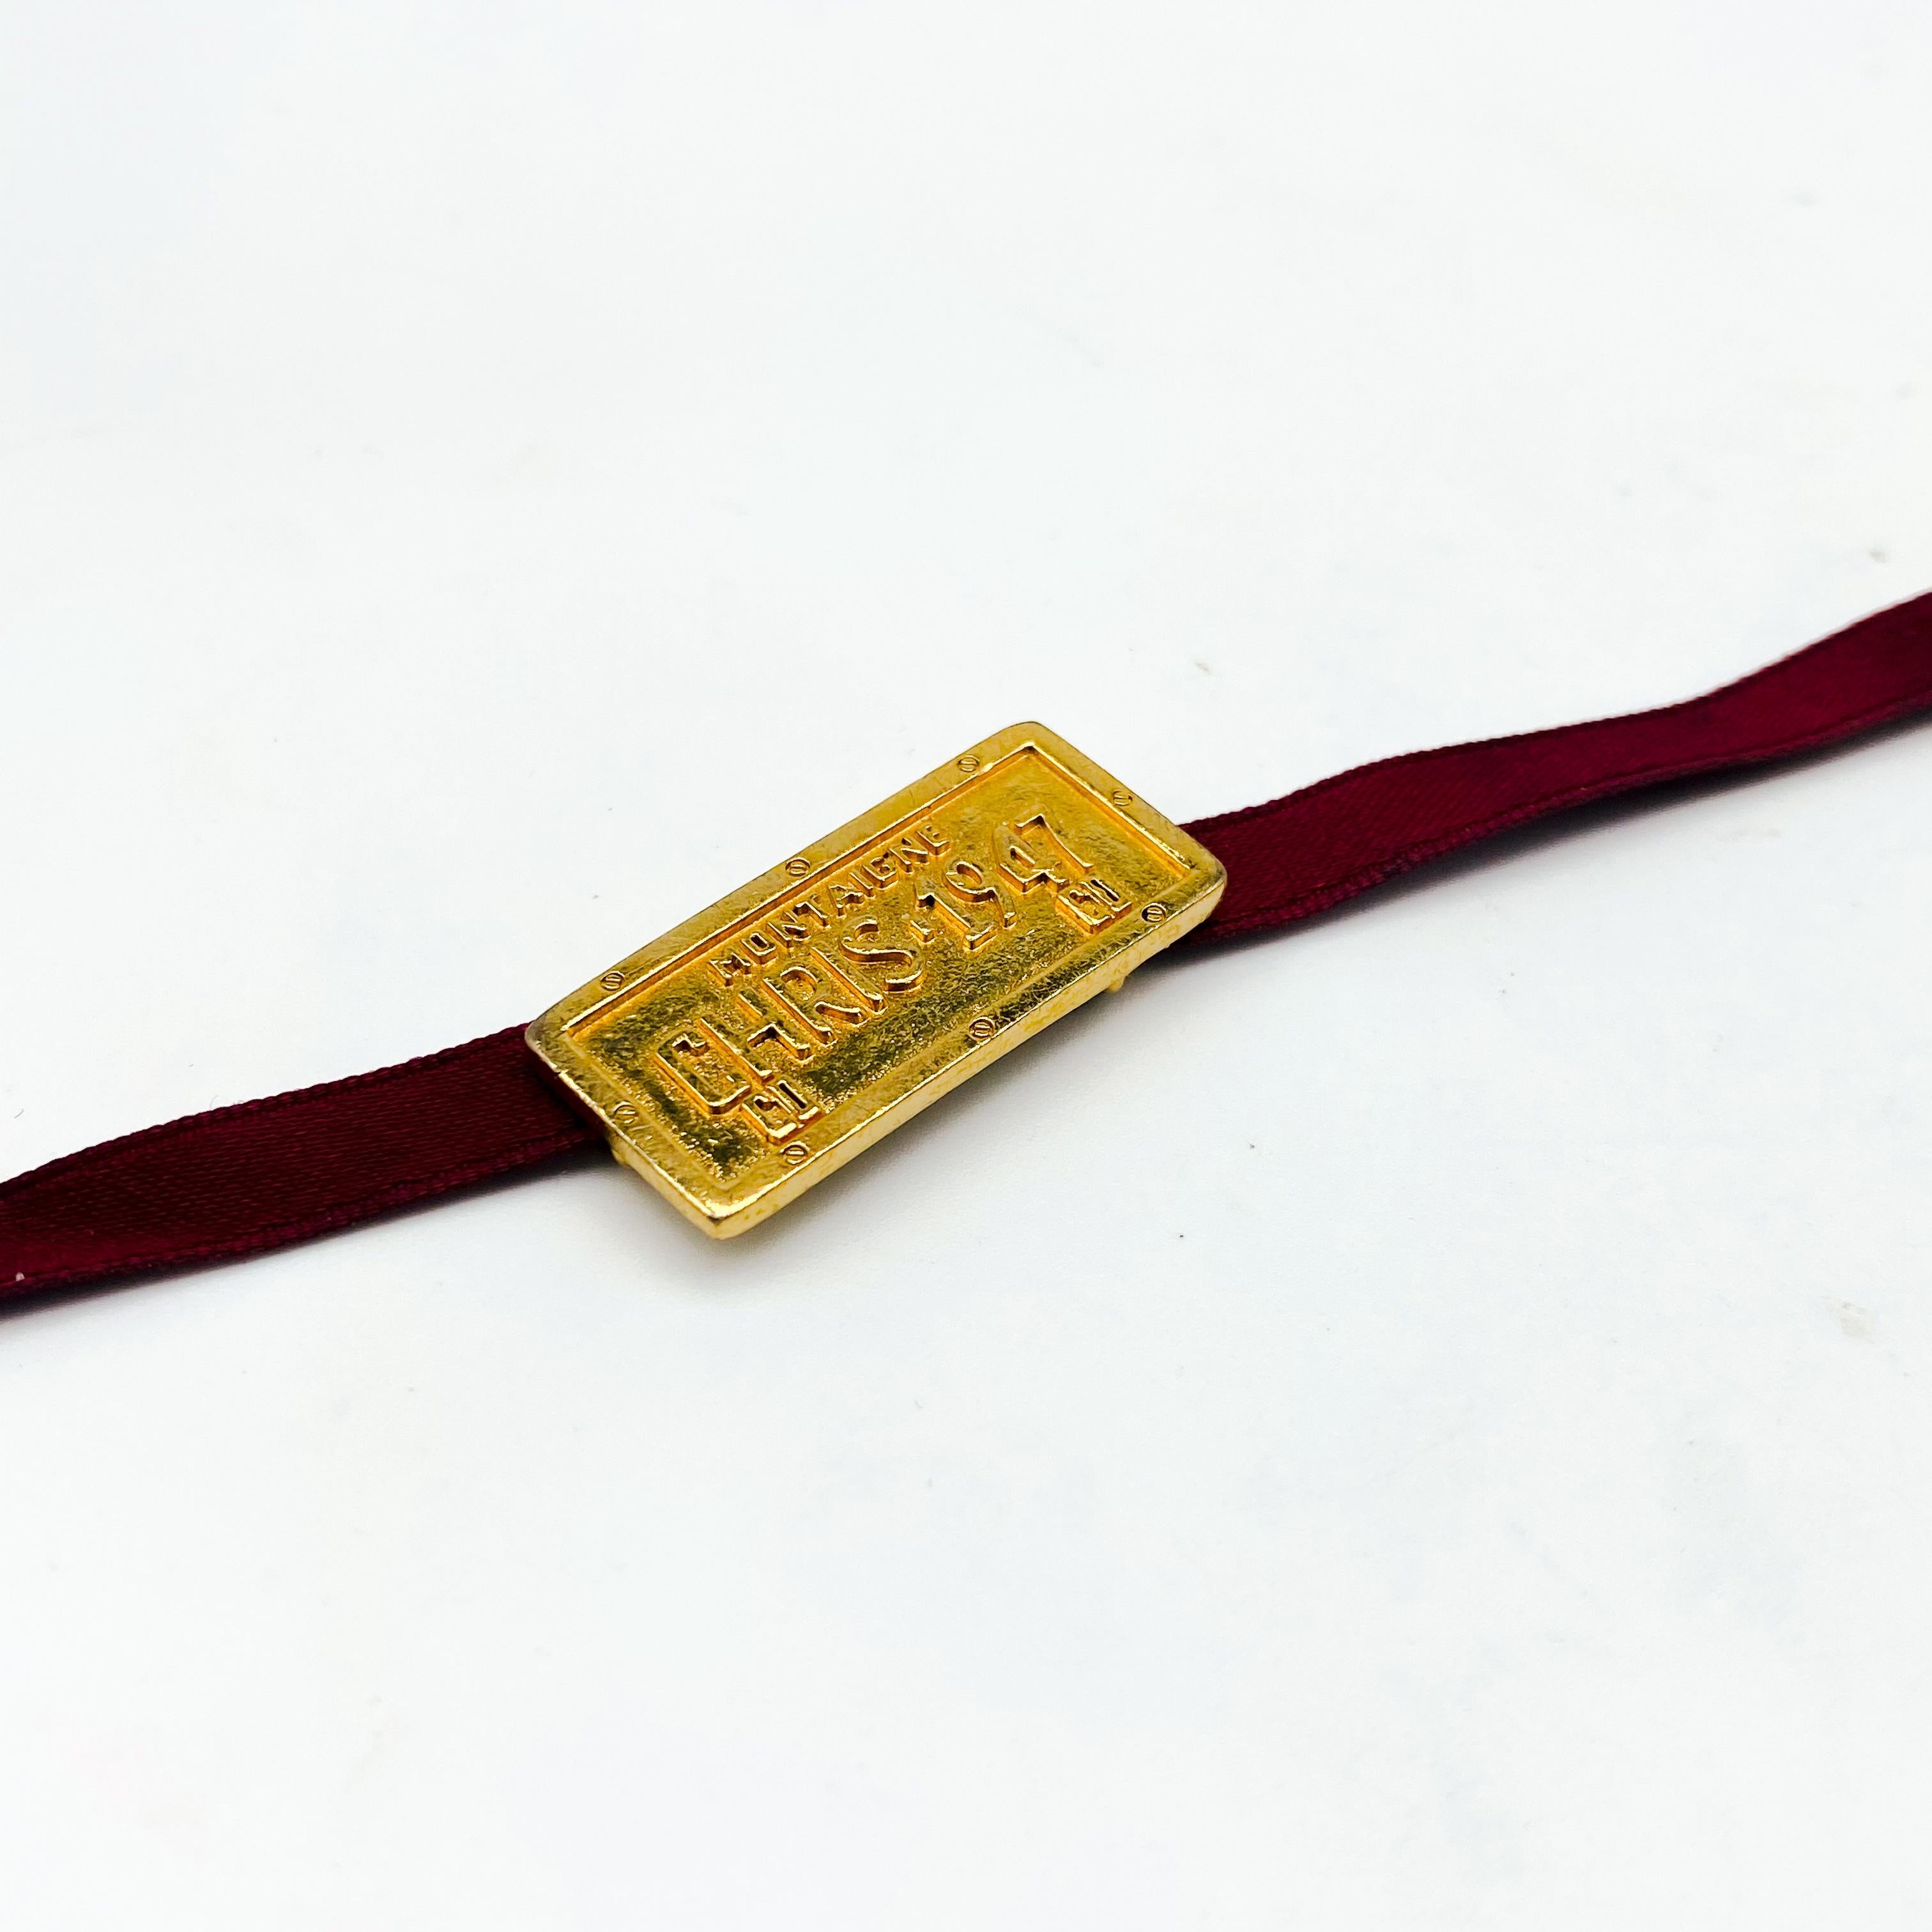 Dior Vintage Y2K Bracelet

Amazing Galliano era Y2K Dior bracelet, featuring a rich red ribbon strap with a gold plated number plate - embossed with 